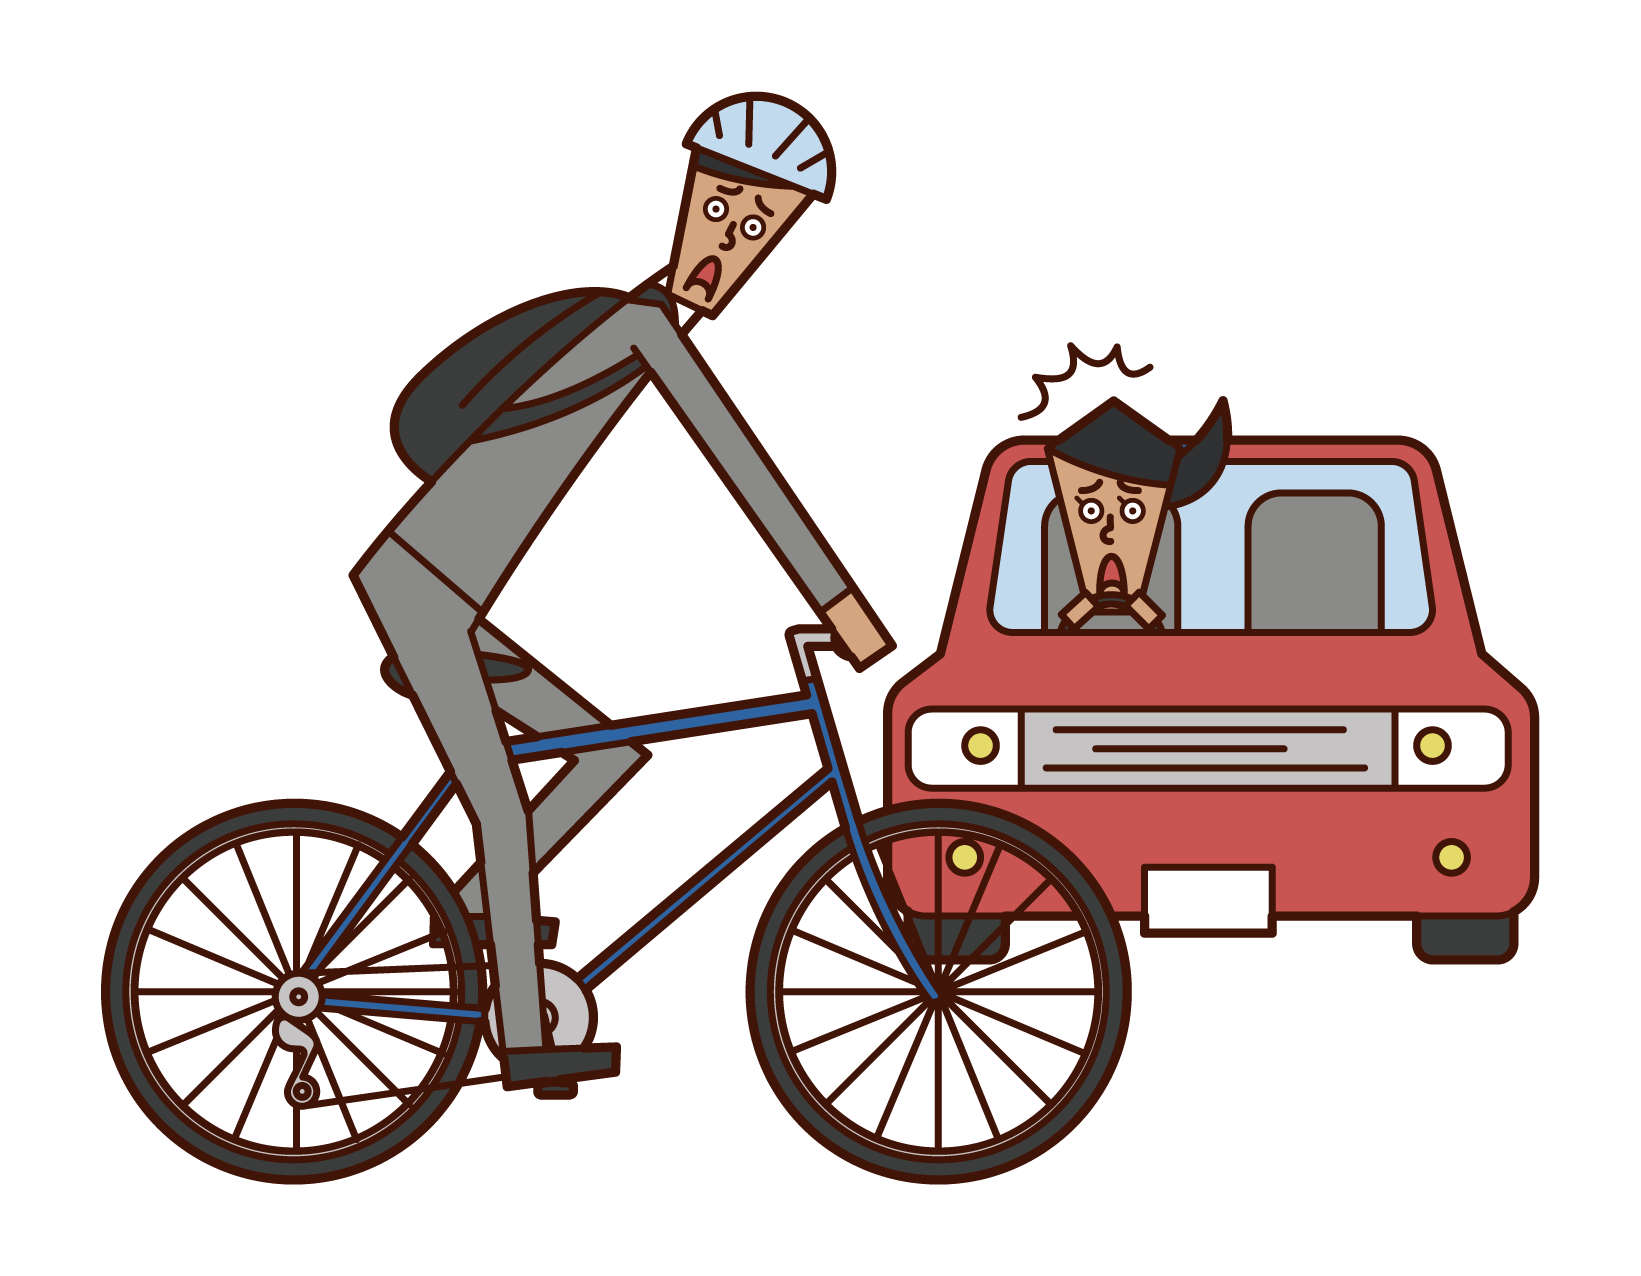 Illustration of bicycle and car traffic accident